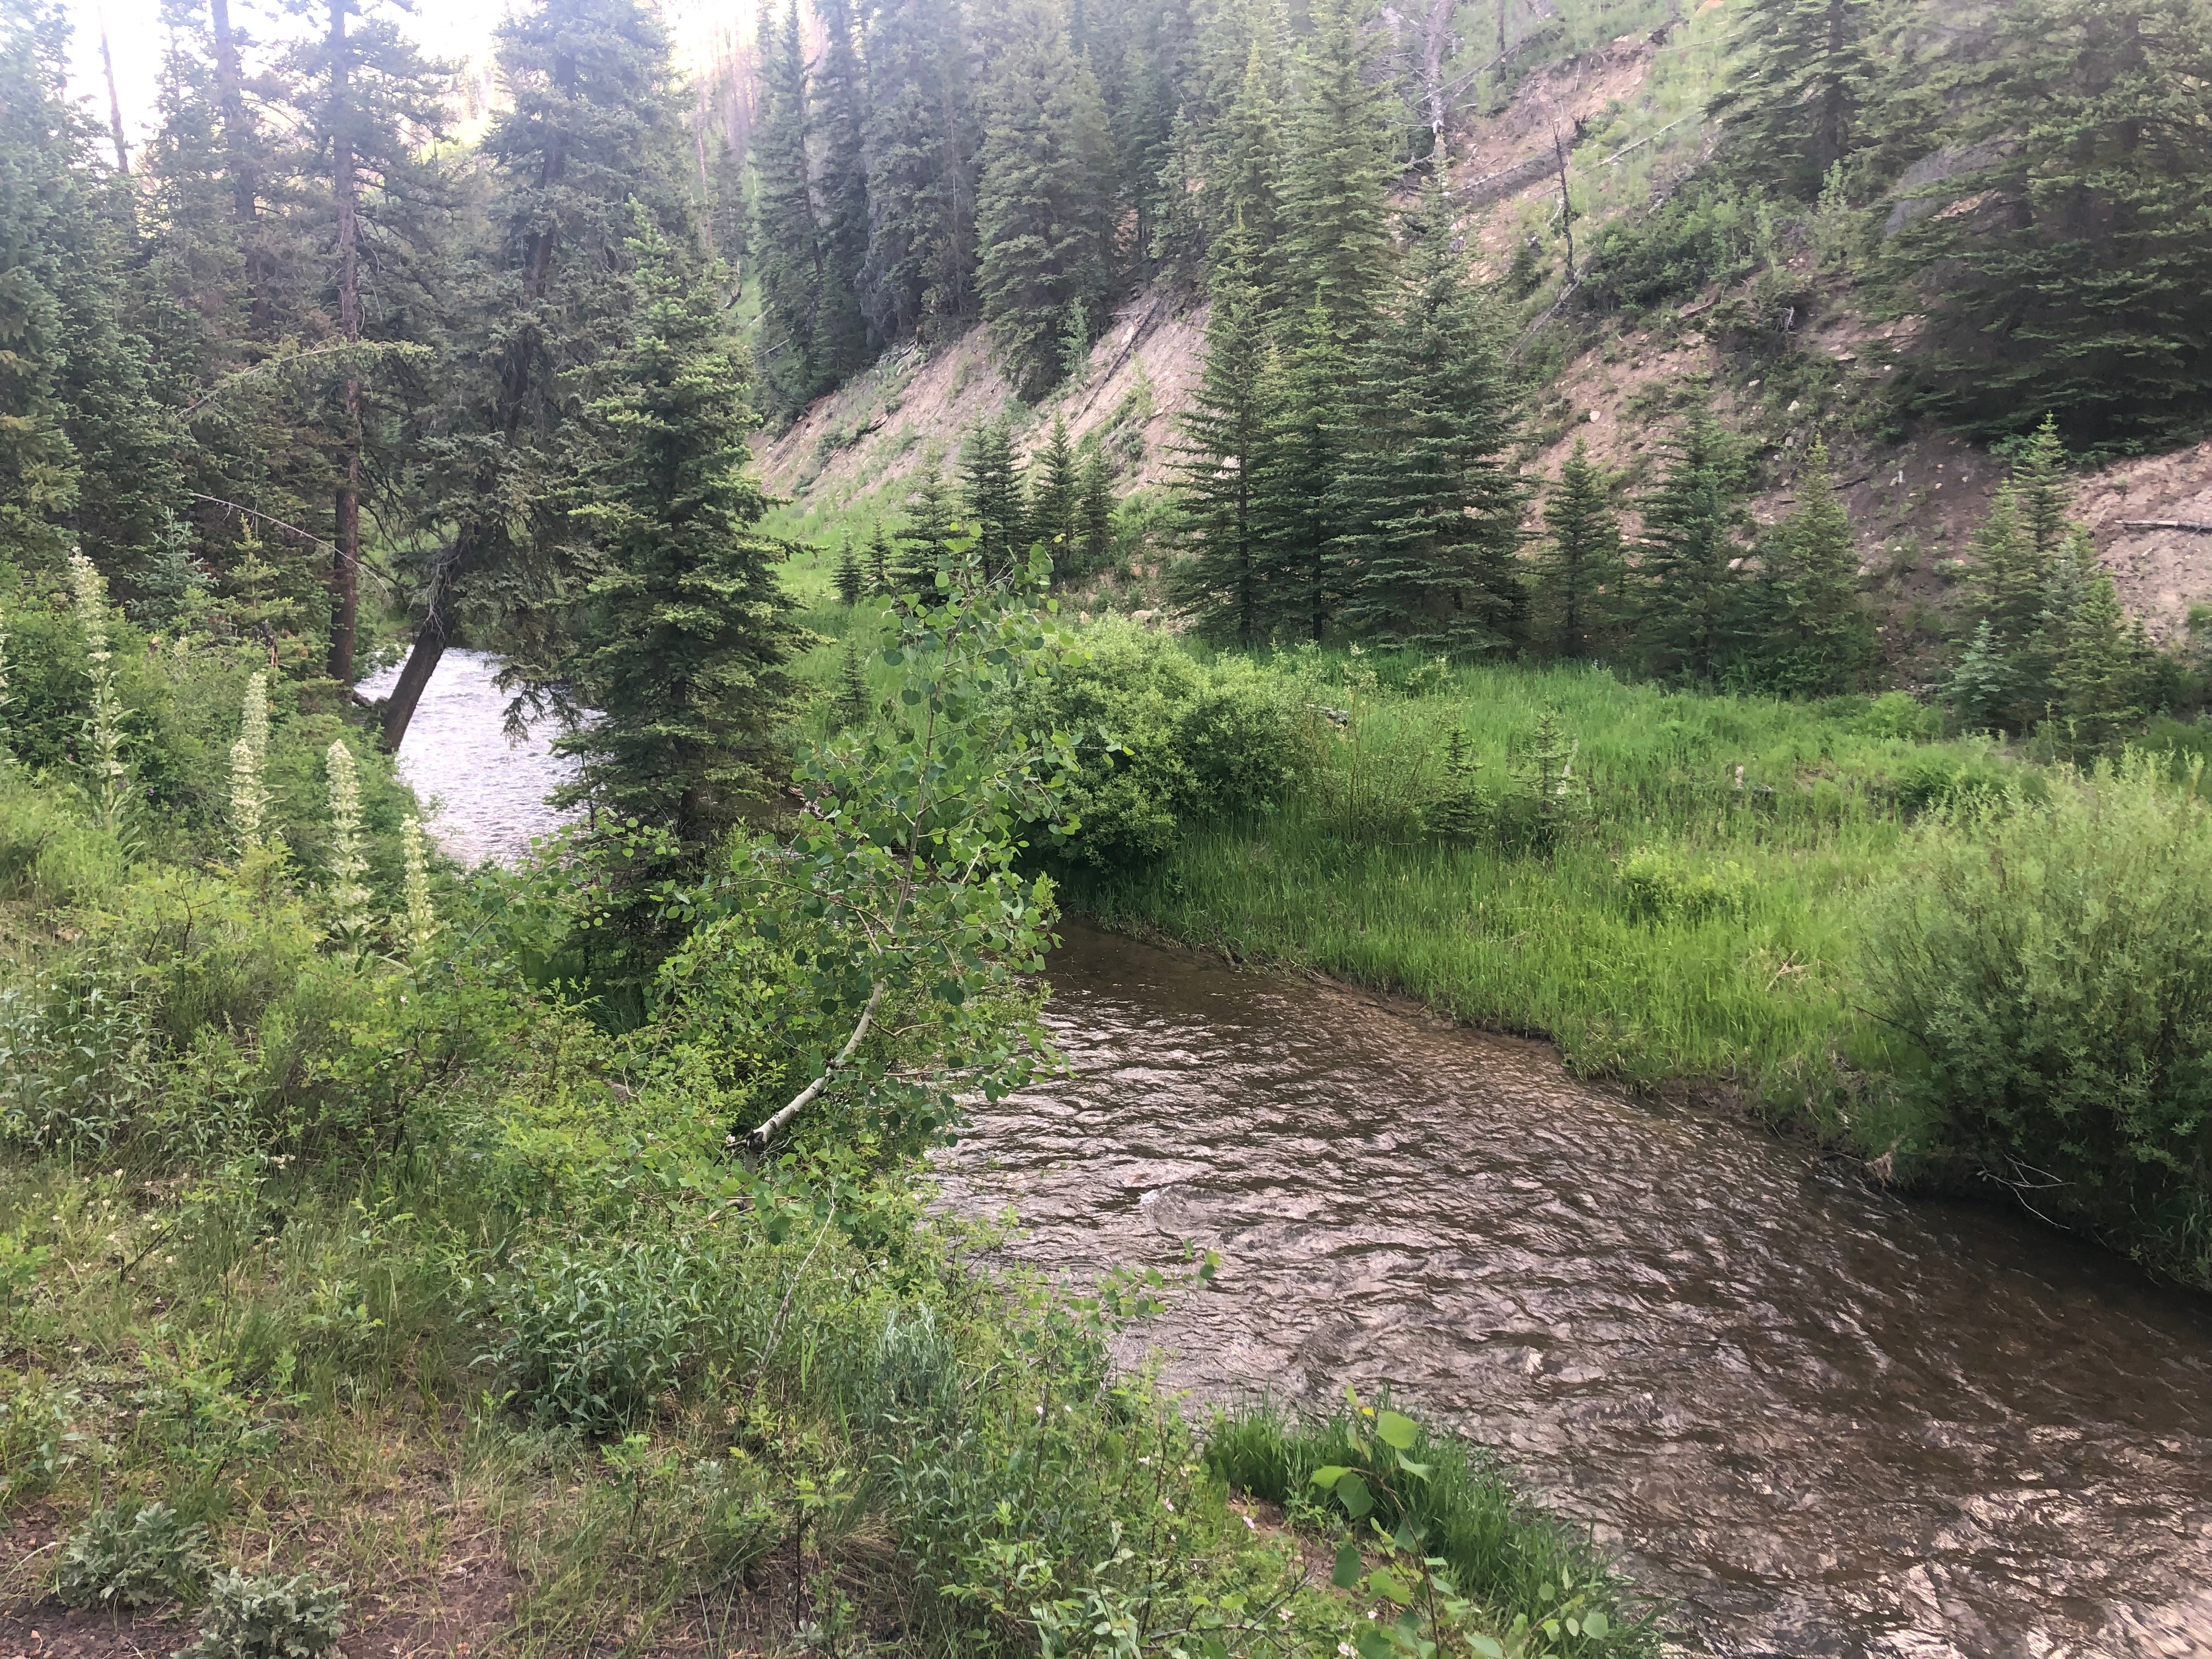 View of creek from upper spot